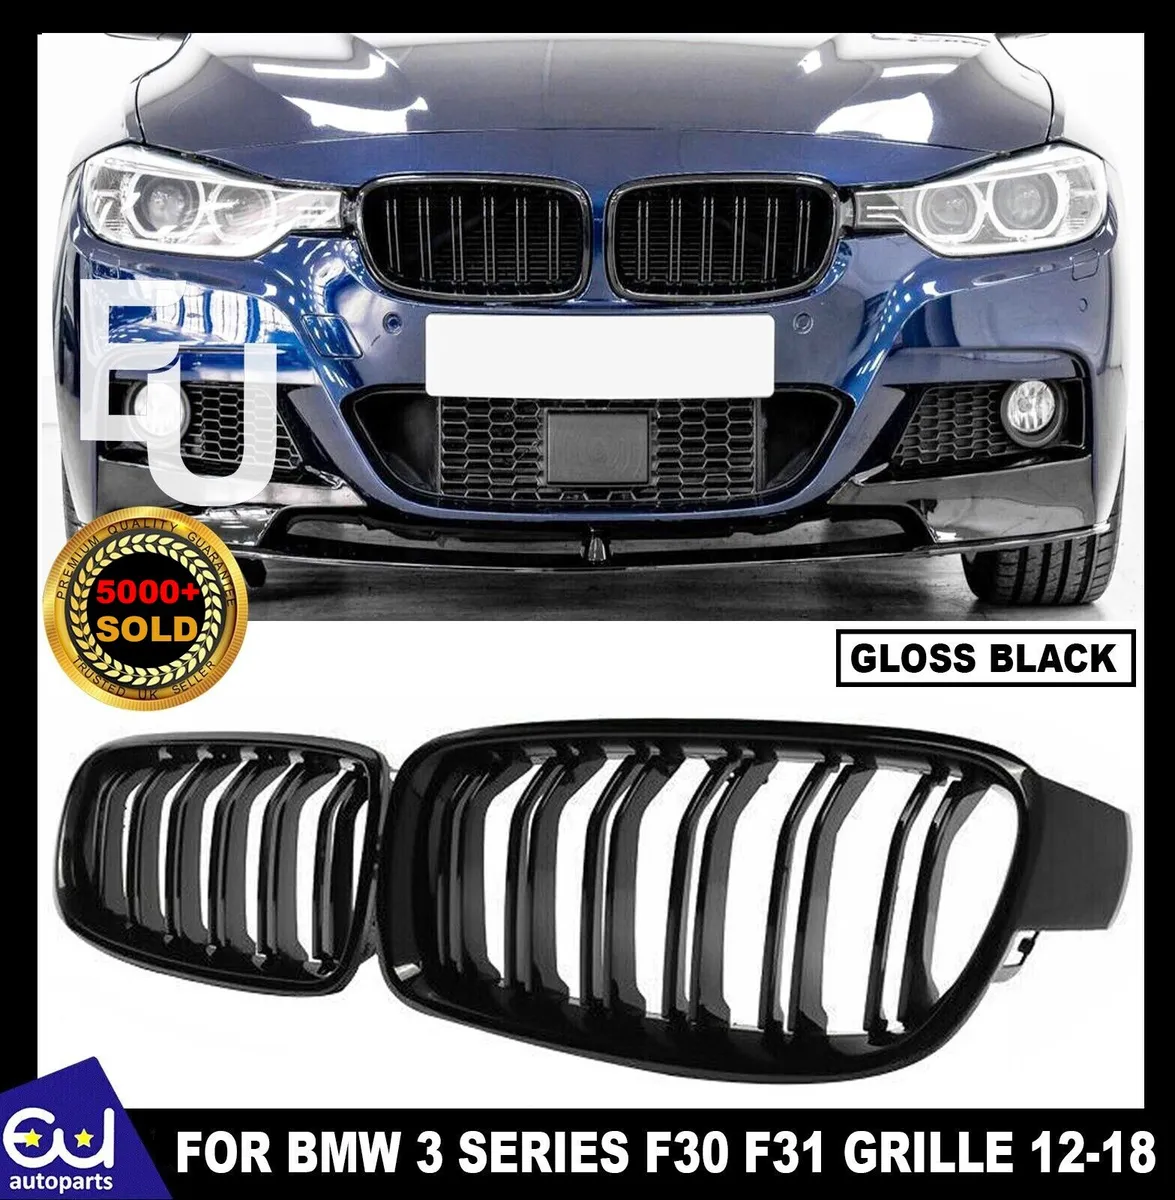 GRILLE FOR BMW 3 SERIES F30 F31 GLOSS BLACK DUAL LINE KIDNEY M PERFORMANCE  STYLE